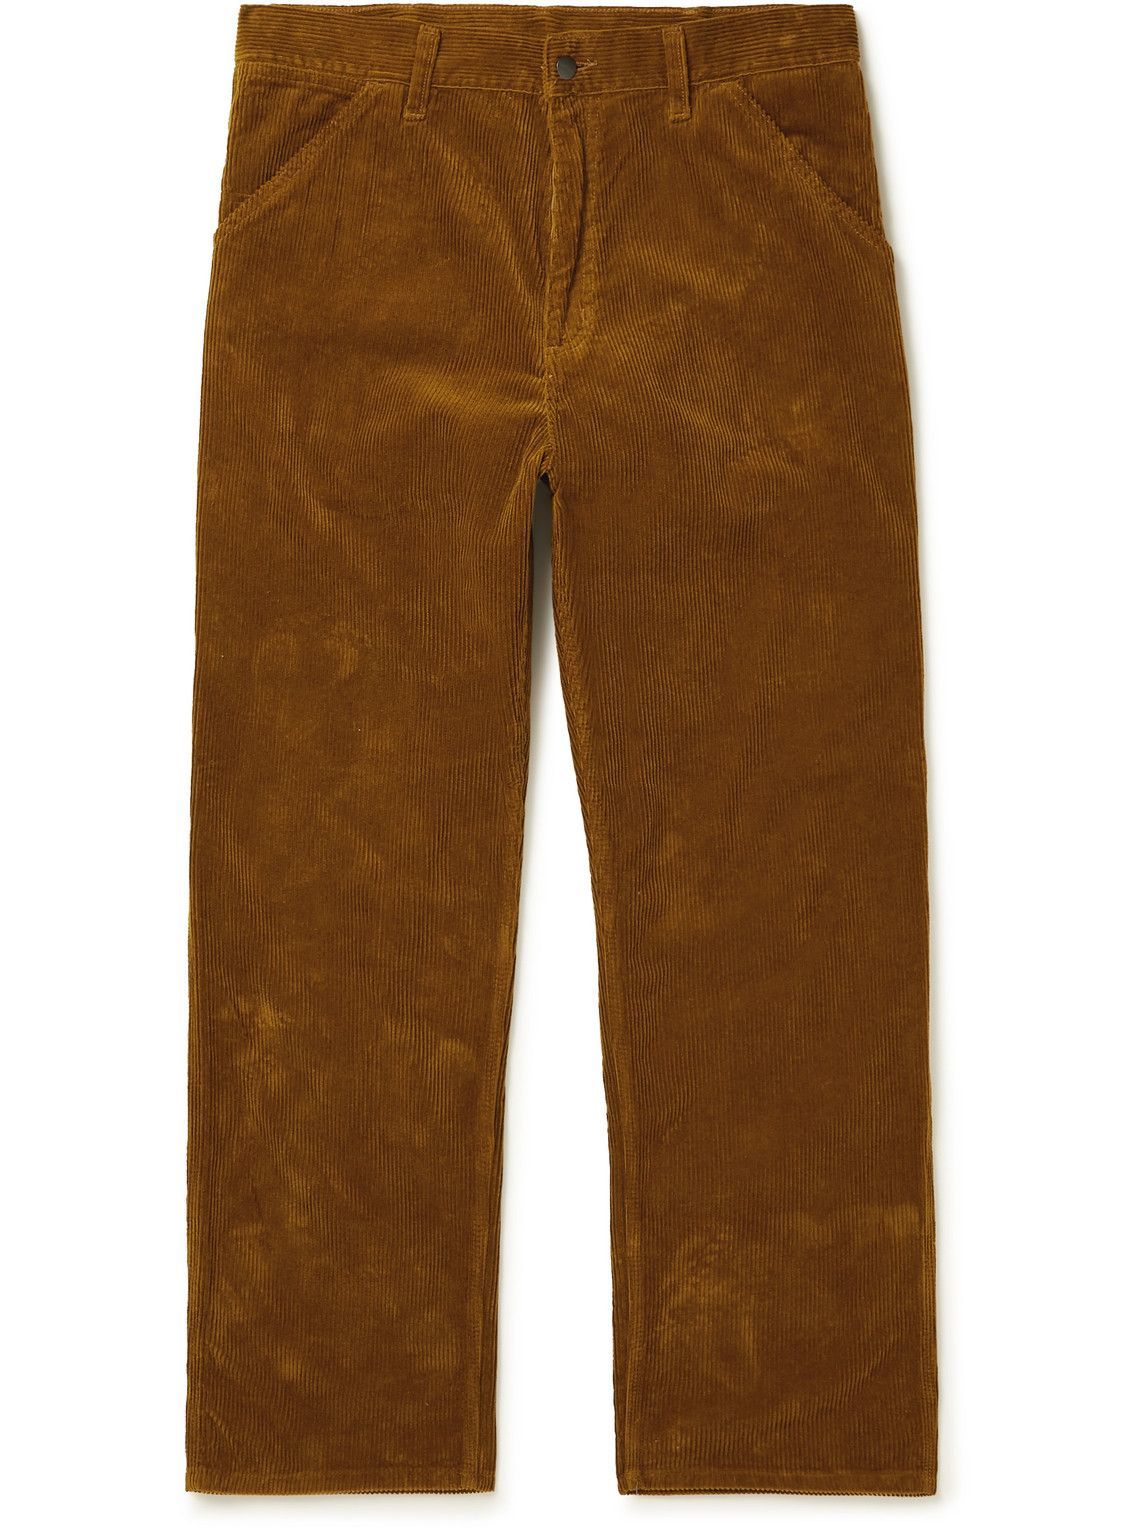 Carhartt WIP  Simple Pant Coventry Corduroy 97 oz Wall Rinsed  HHV